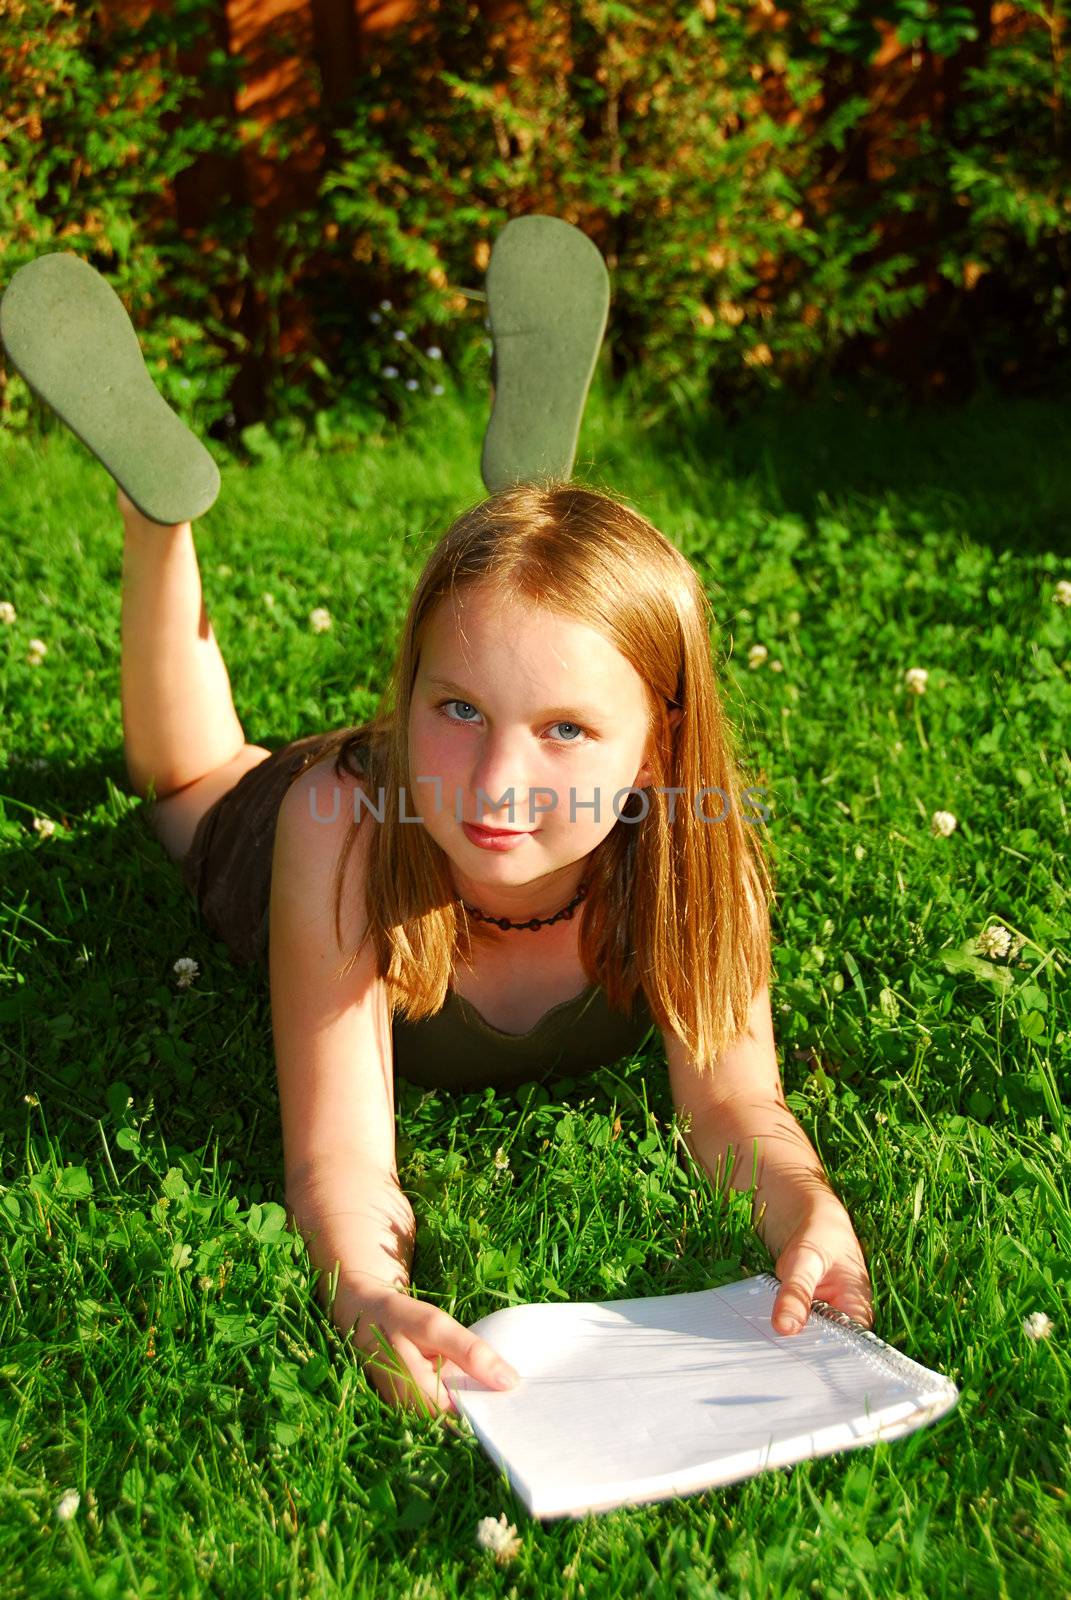 Young girl lying on green grass outside with a notepad